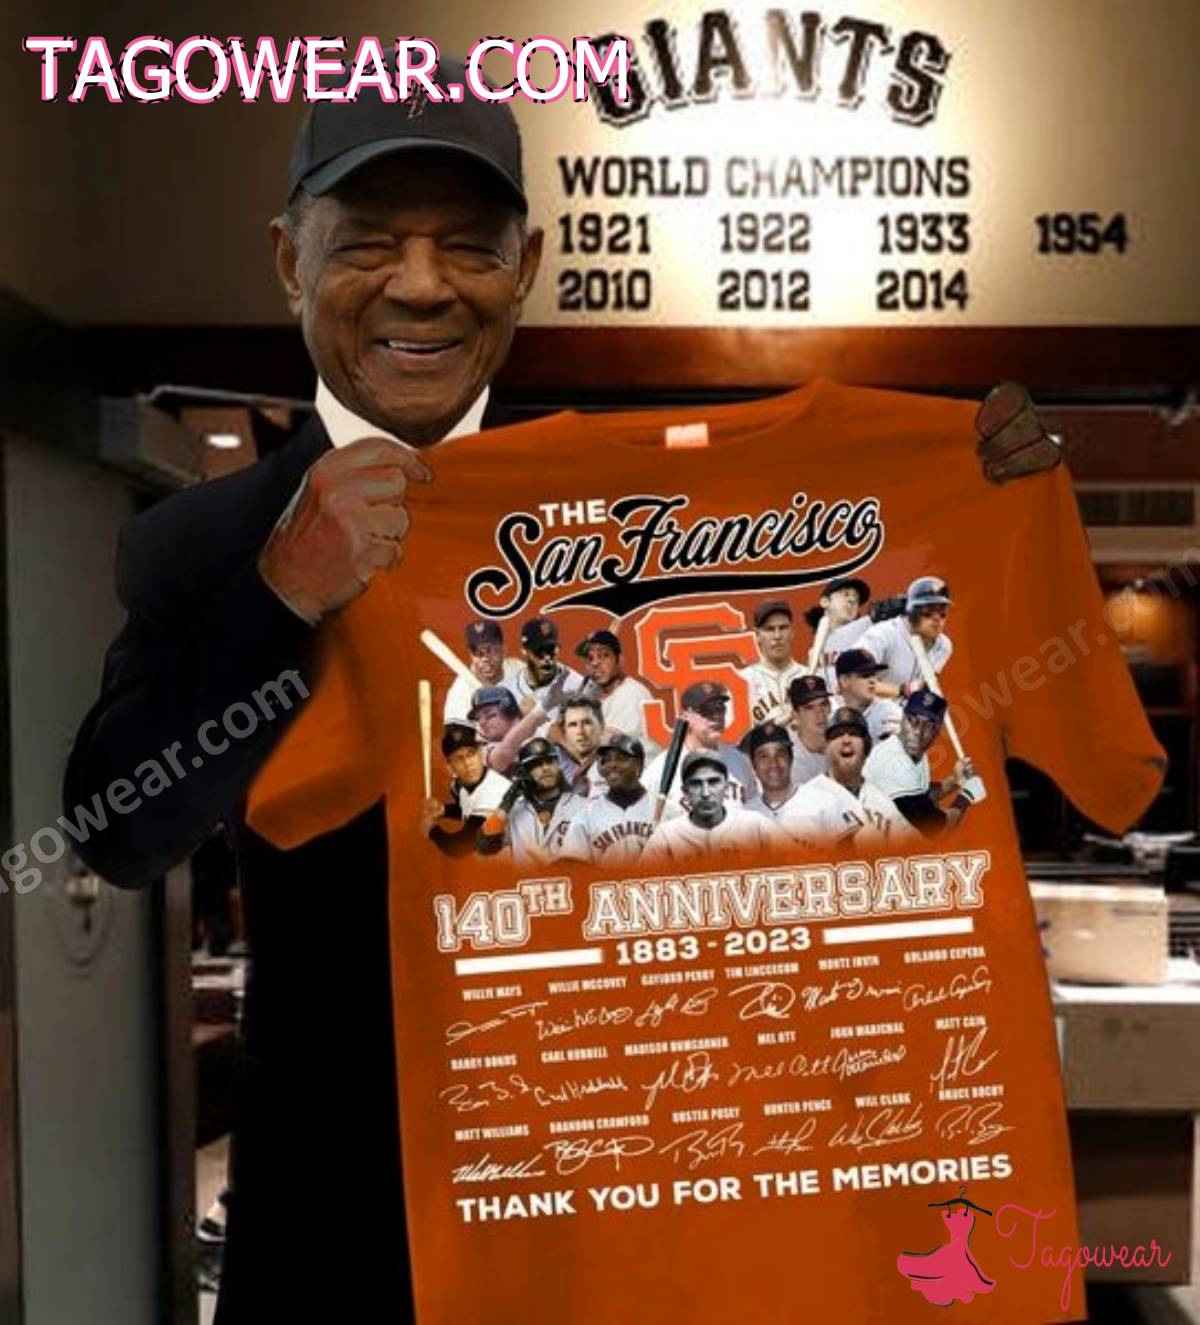 The San Francisco Giants 140th Anniversary 1883-2023 Thank You For The Memories Signatures Shirt